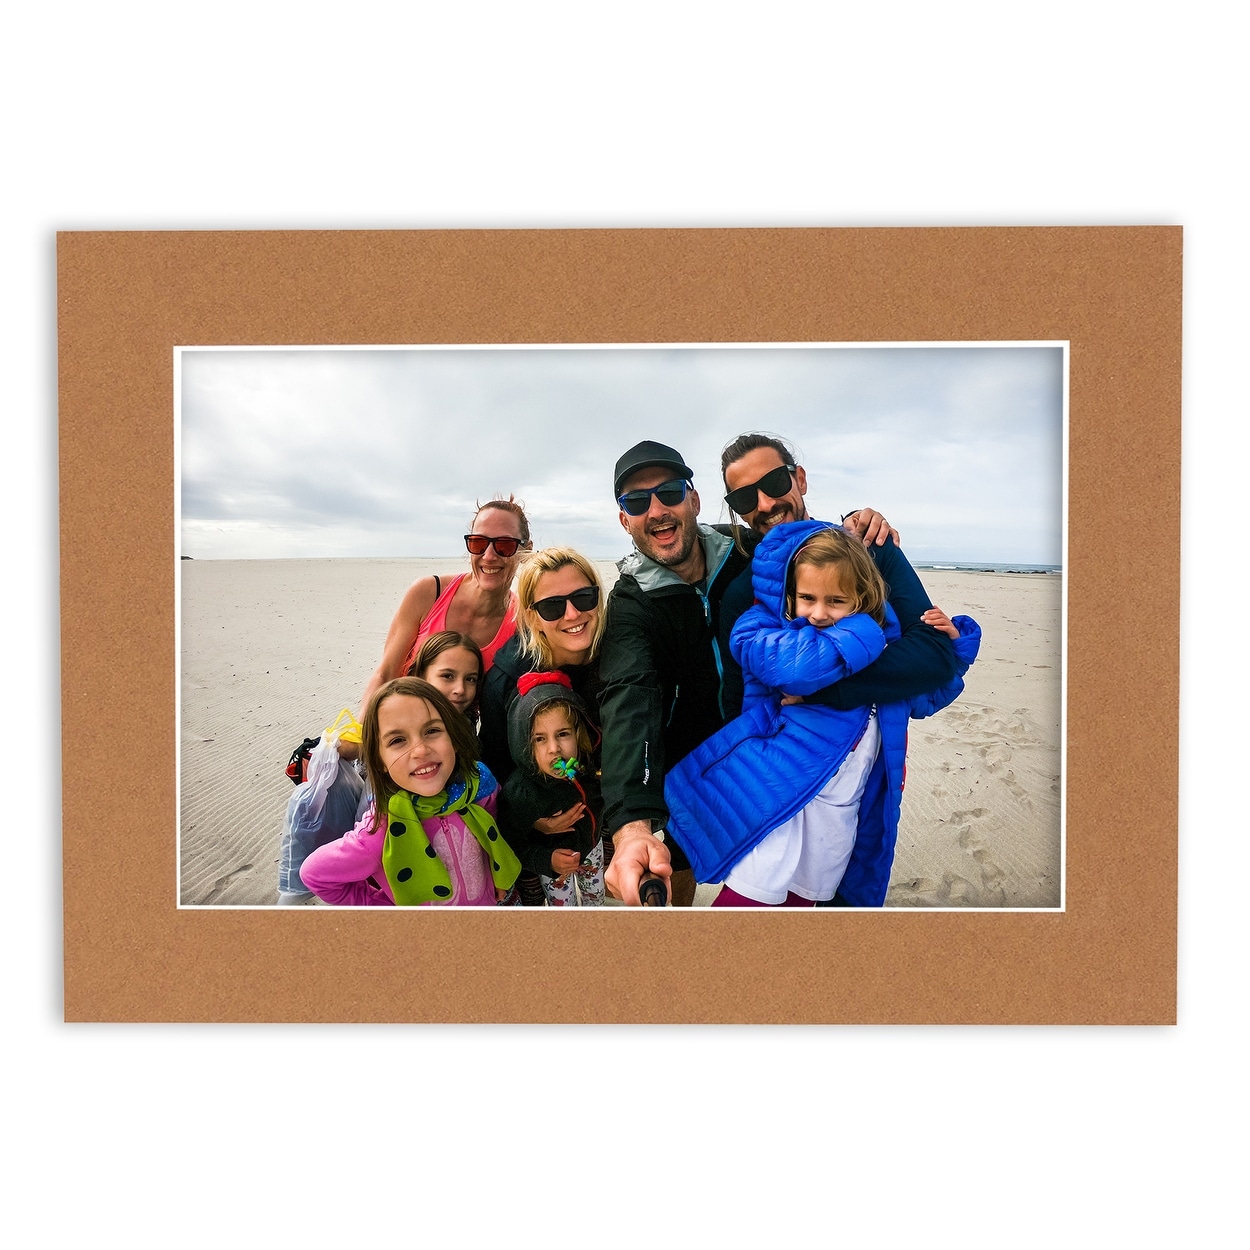  12x16 Mat for 8x10 Photo - Precut Aged Oak Brown Picture  Matboard for Frames 12 x 16 Inches - Bevel Cut to Display Art 8 x 10 Inches  - Acid Free